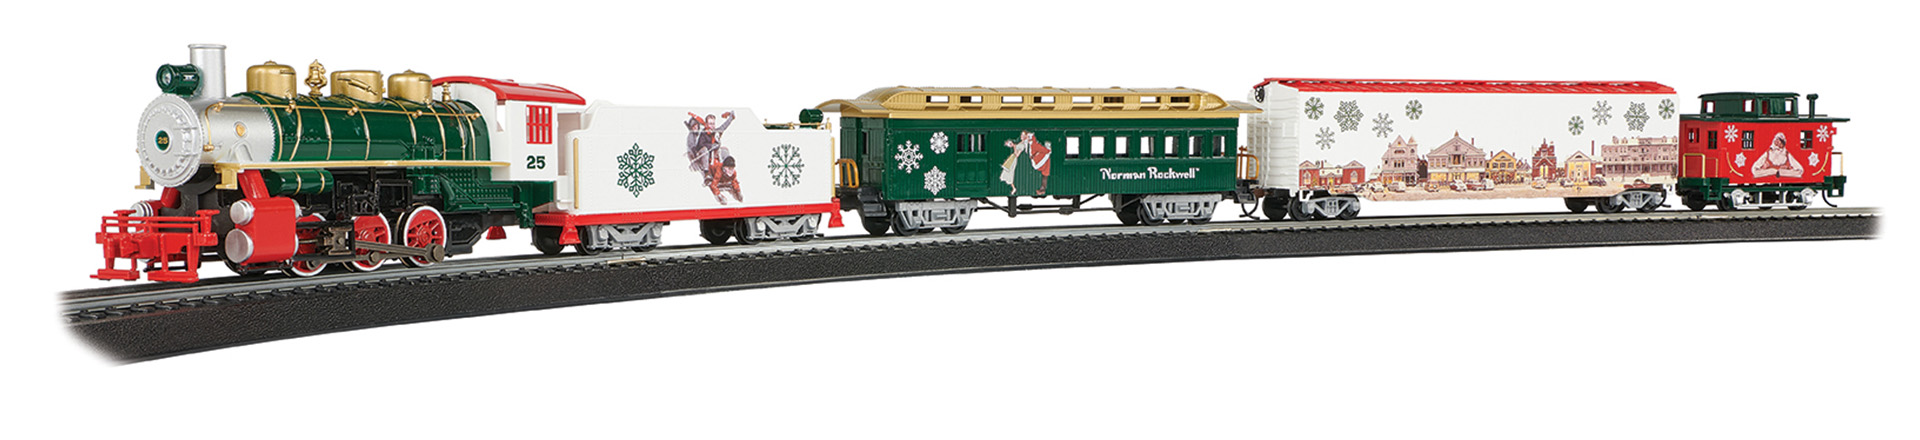 Norman Rockwell Christmas Express (HO Scale)